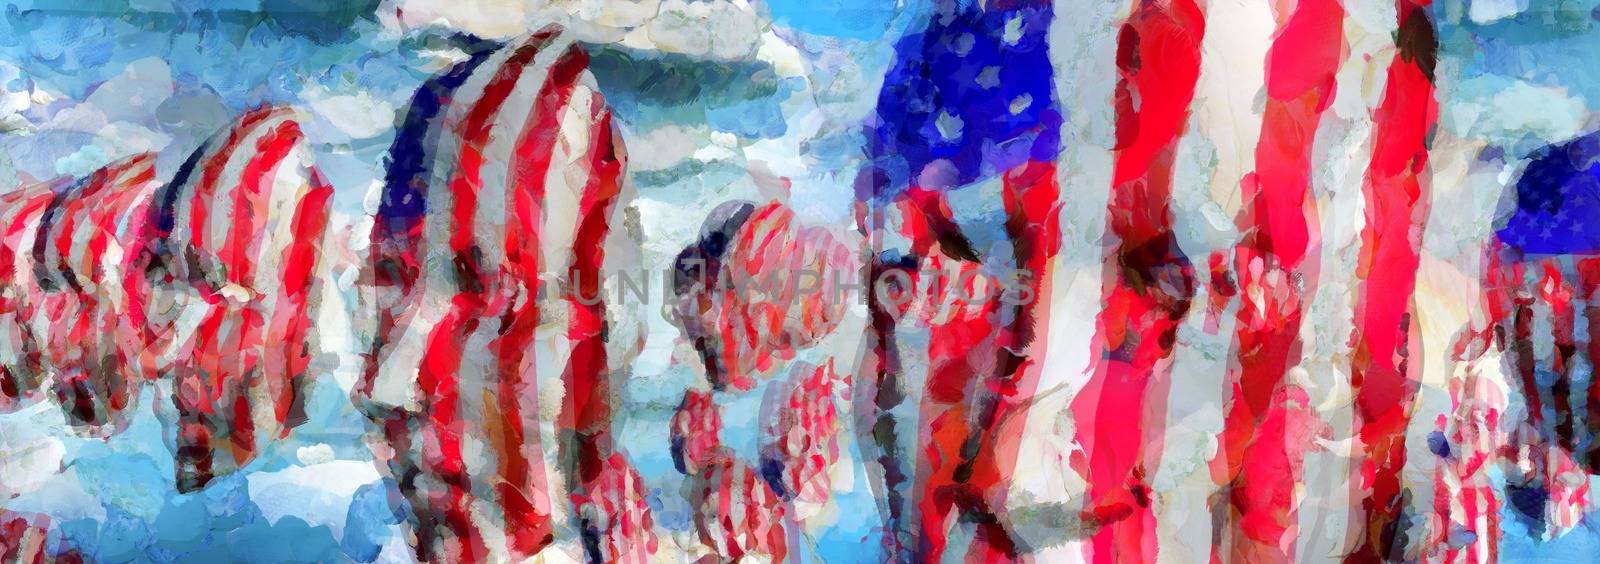 Surreal painting. Faces in US national colors.